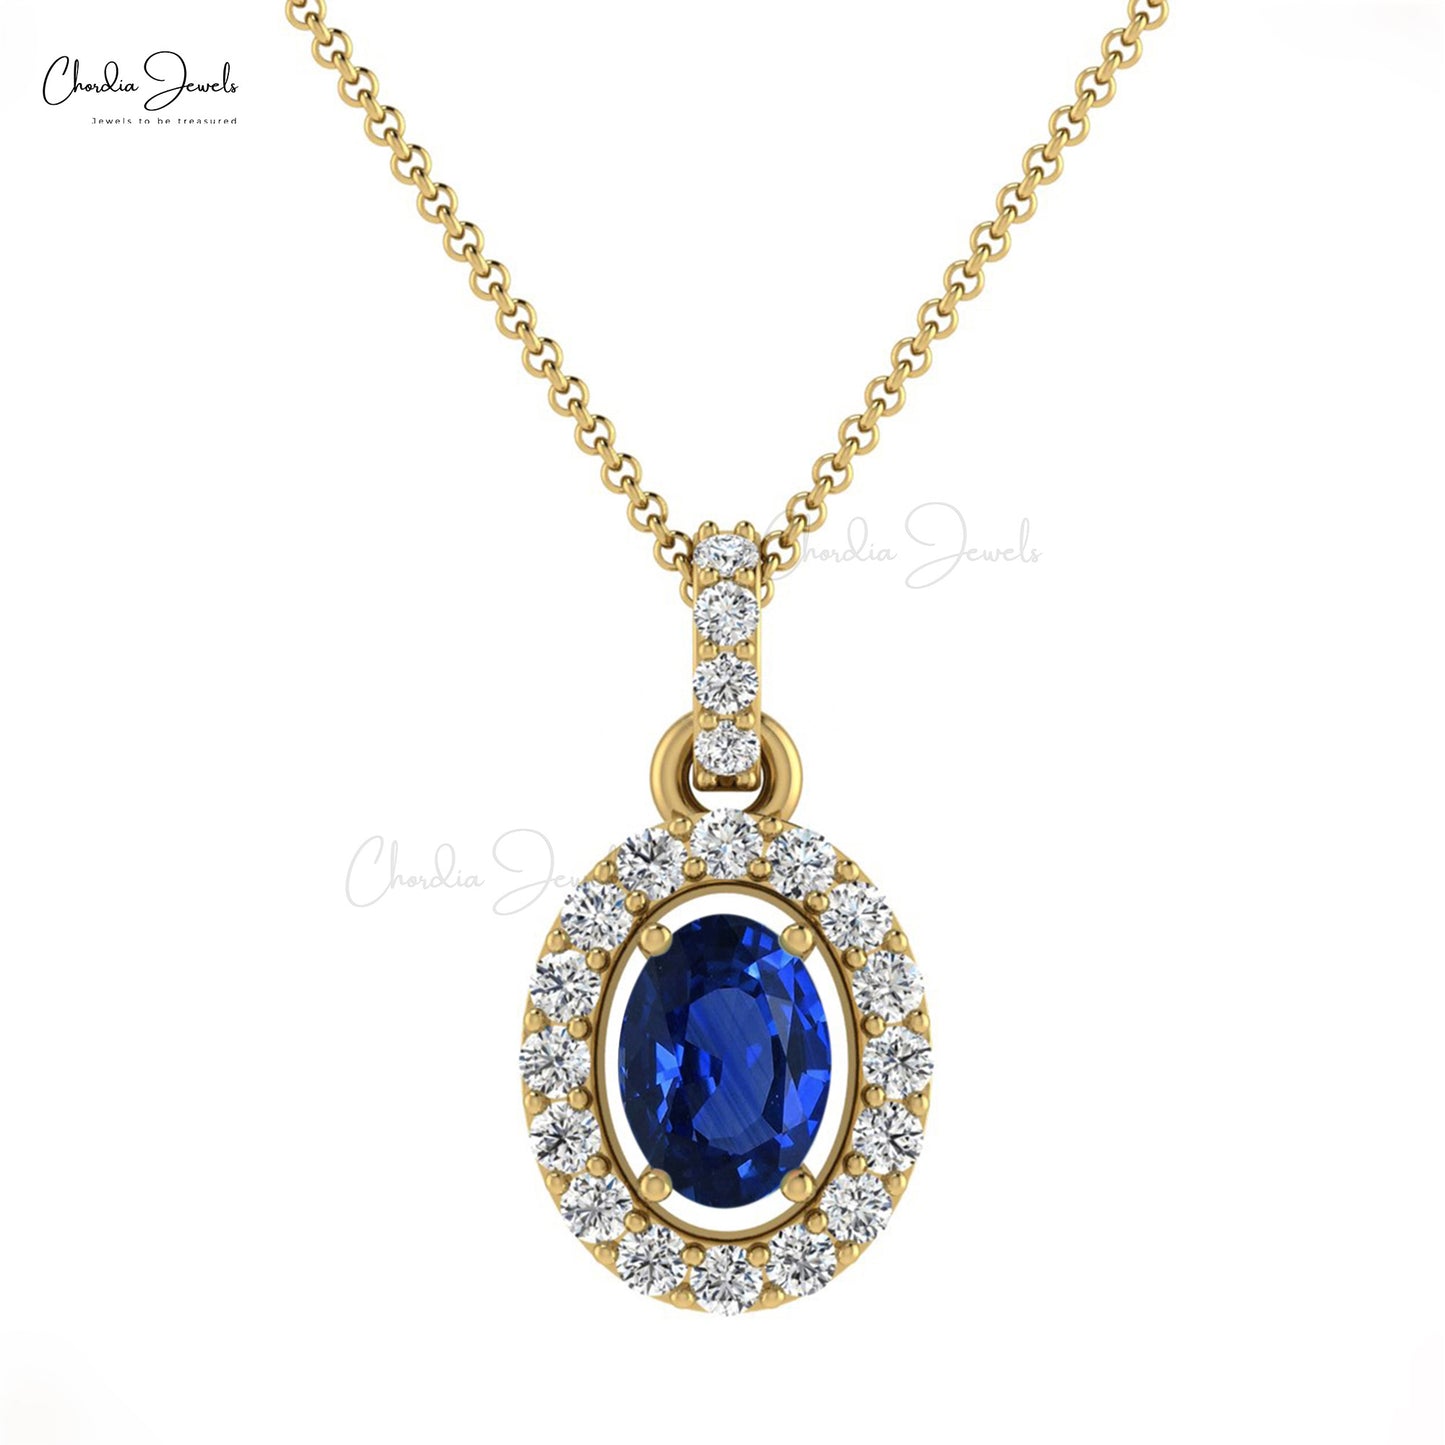 Natural Blue Sapphire Halo Pendant, 14k Solid Gold Diamond Pendant, 8x6mm Oval Faceted Gemstone Pendant Gift for Her